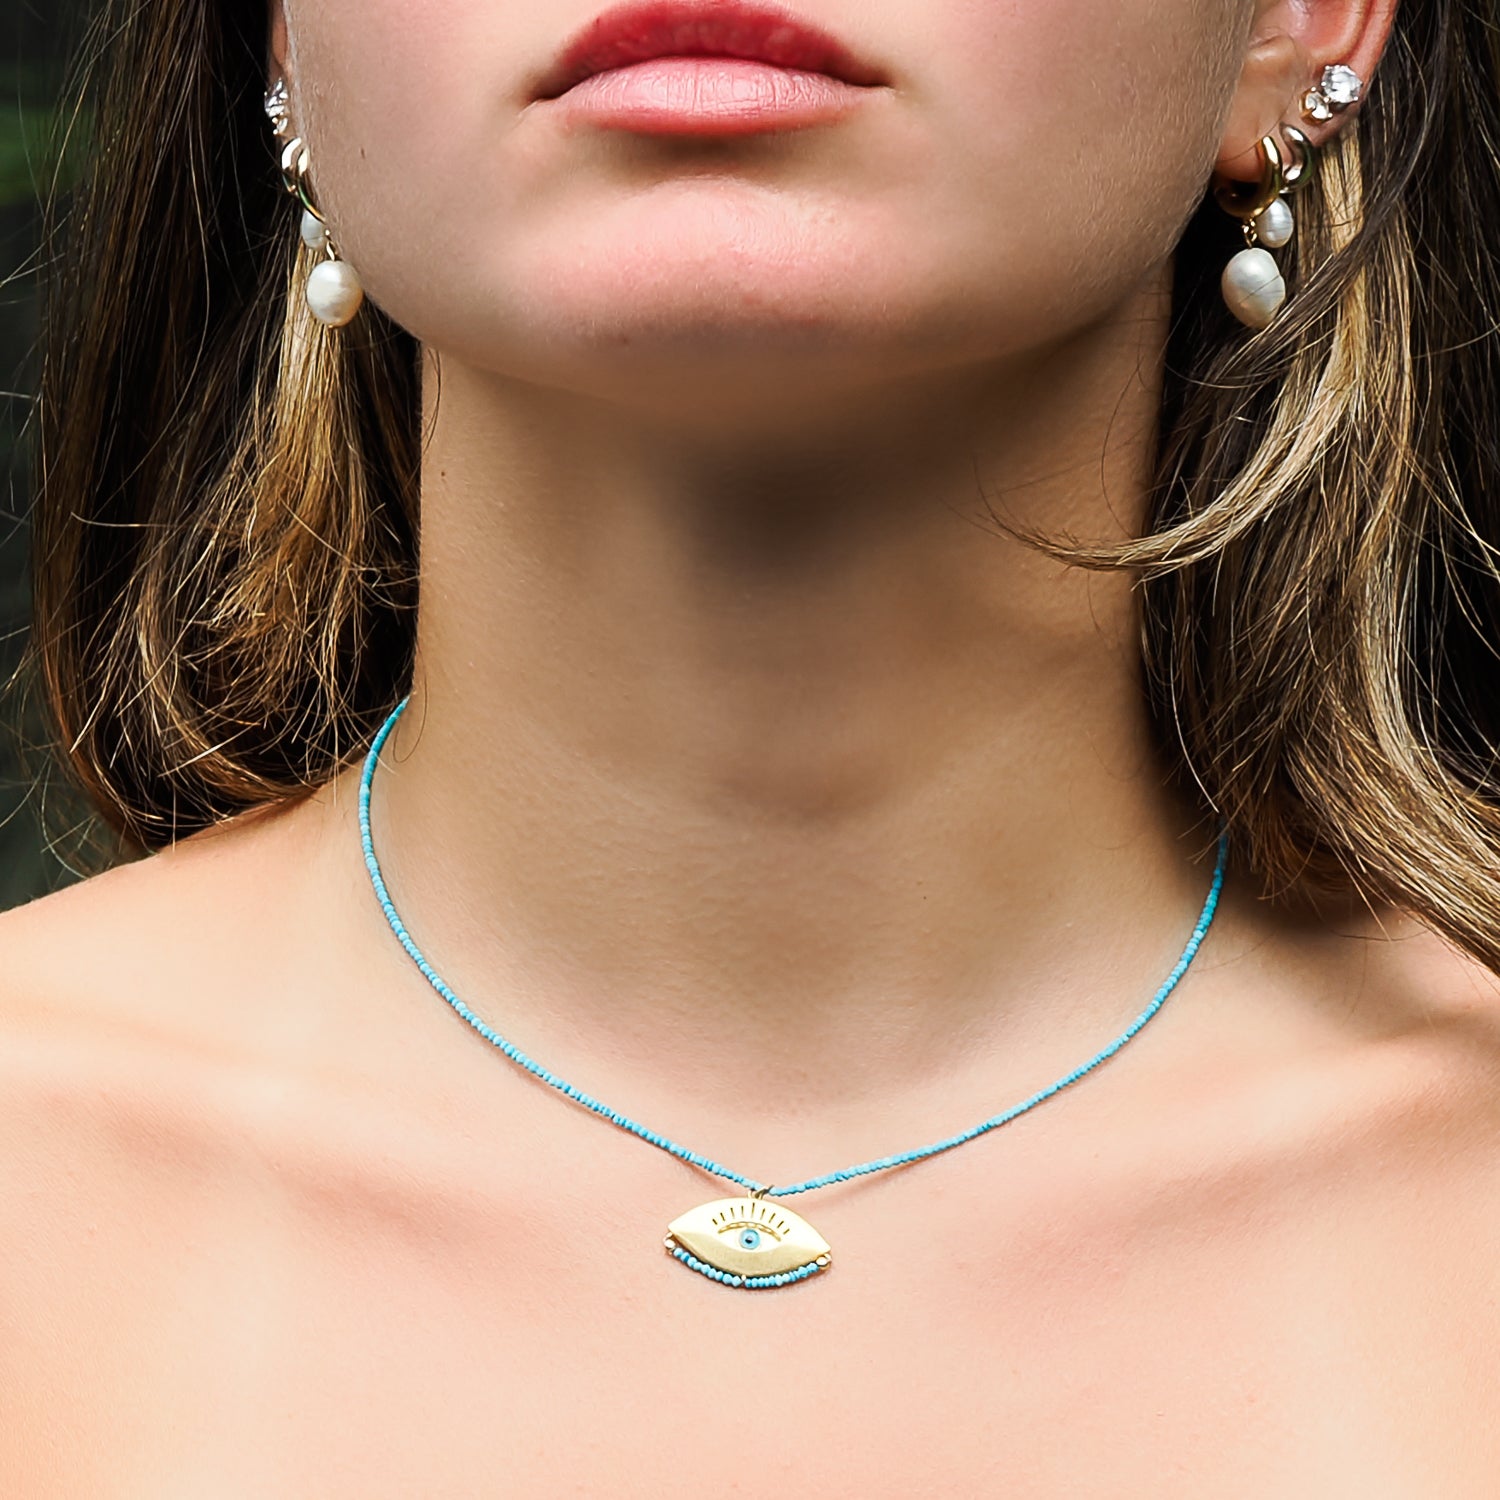 Model Embraces Protection with Turquoise Evil Eye Necklace.